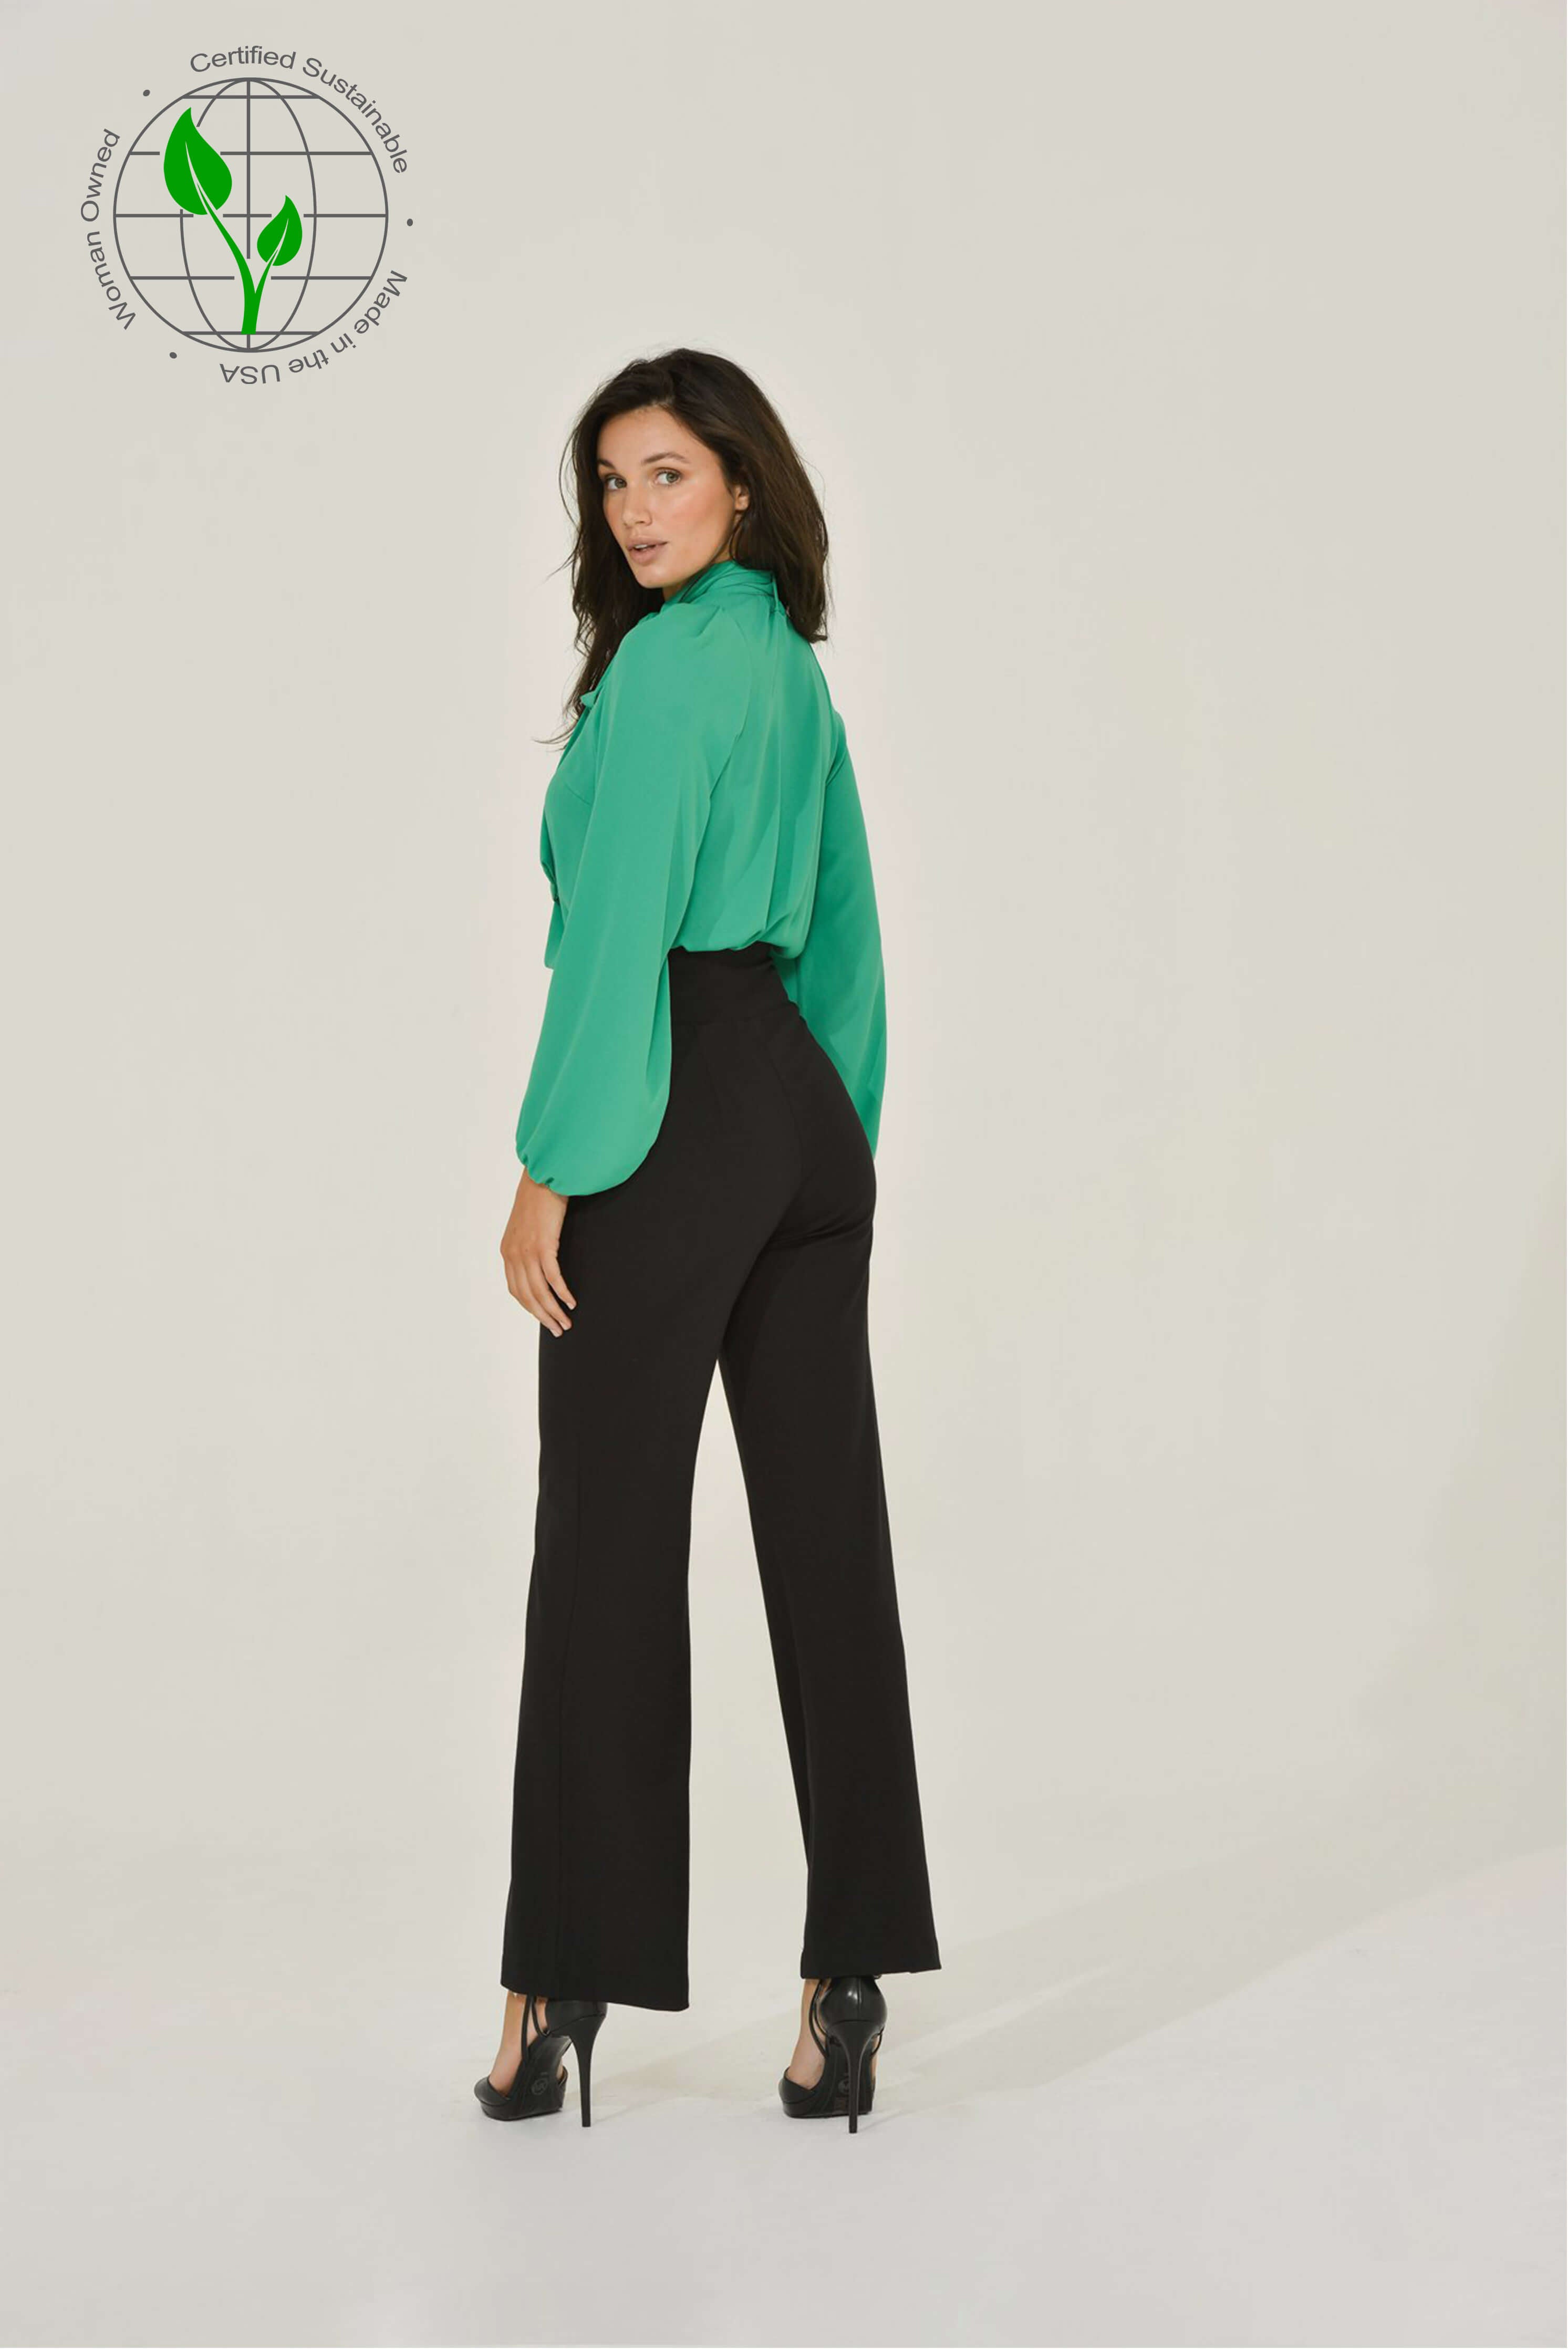 Trouser We Go Navy Blue High-Waisted Pants  Navy pants outfit, Trendy work  outfit, Professional outfits women